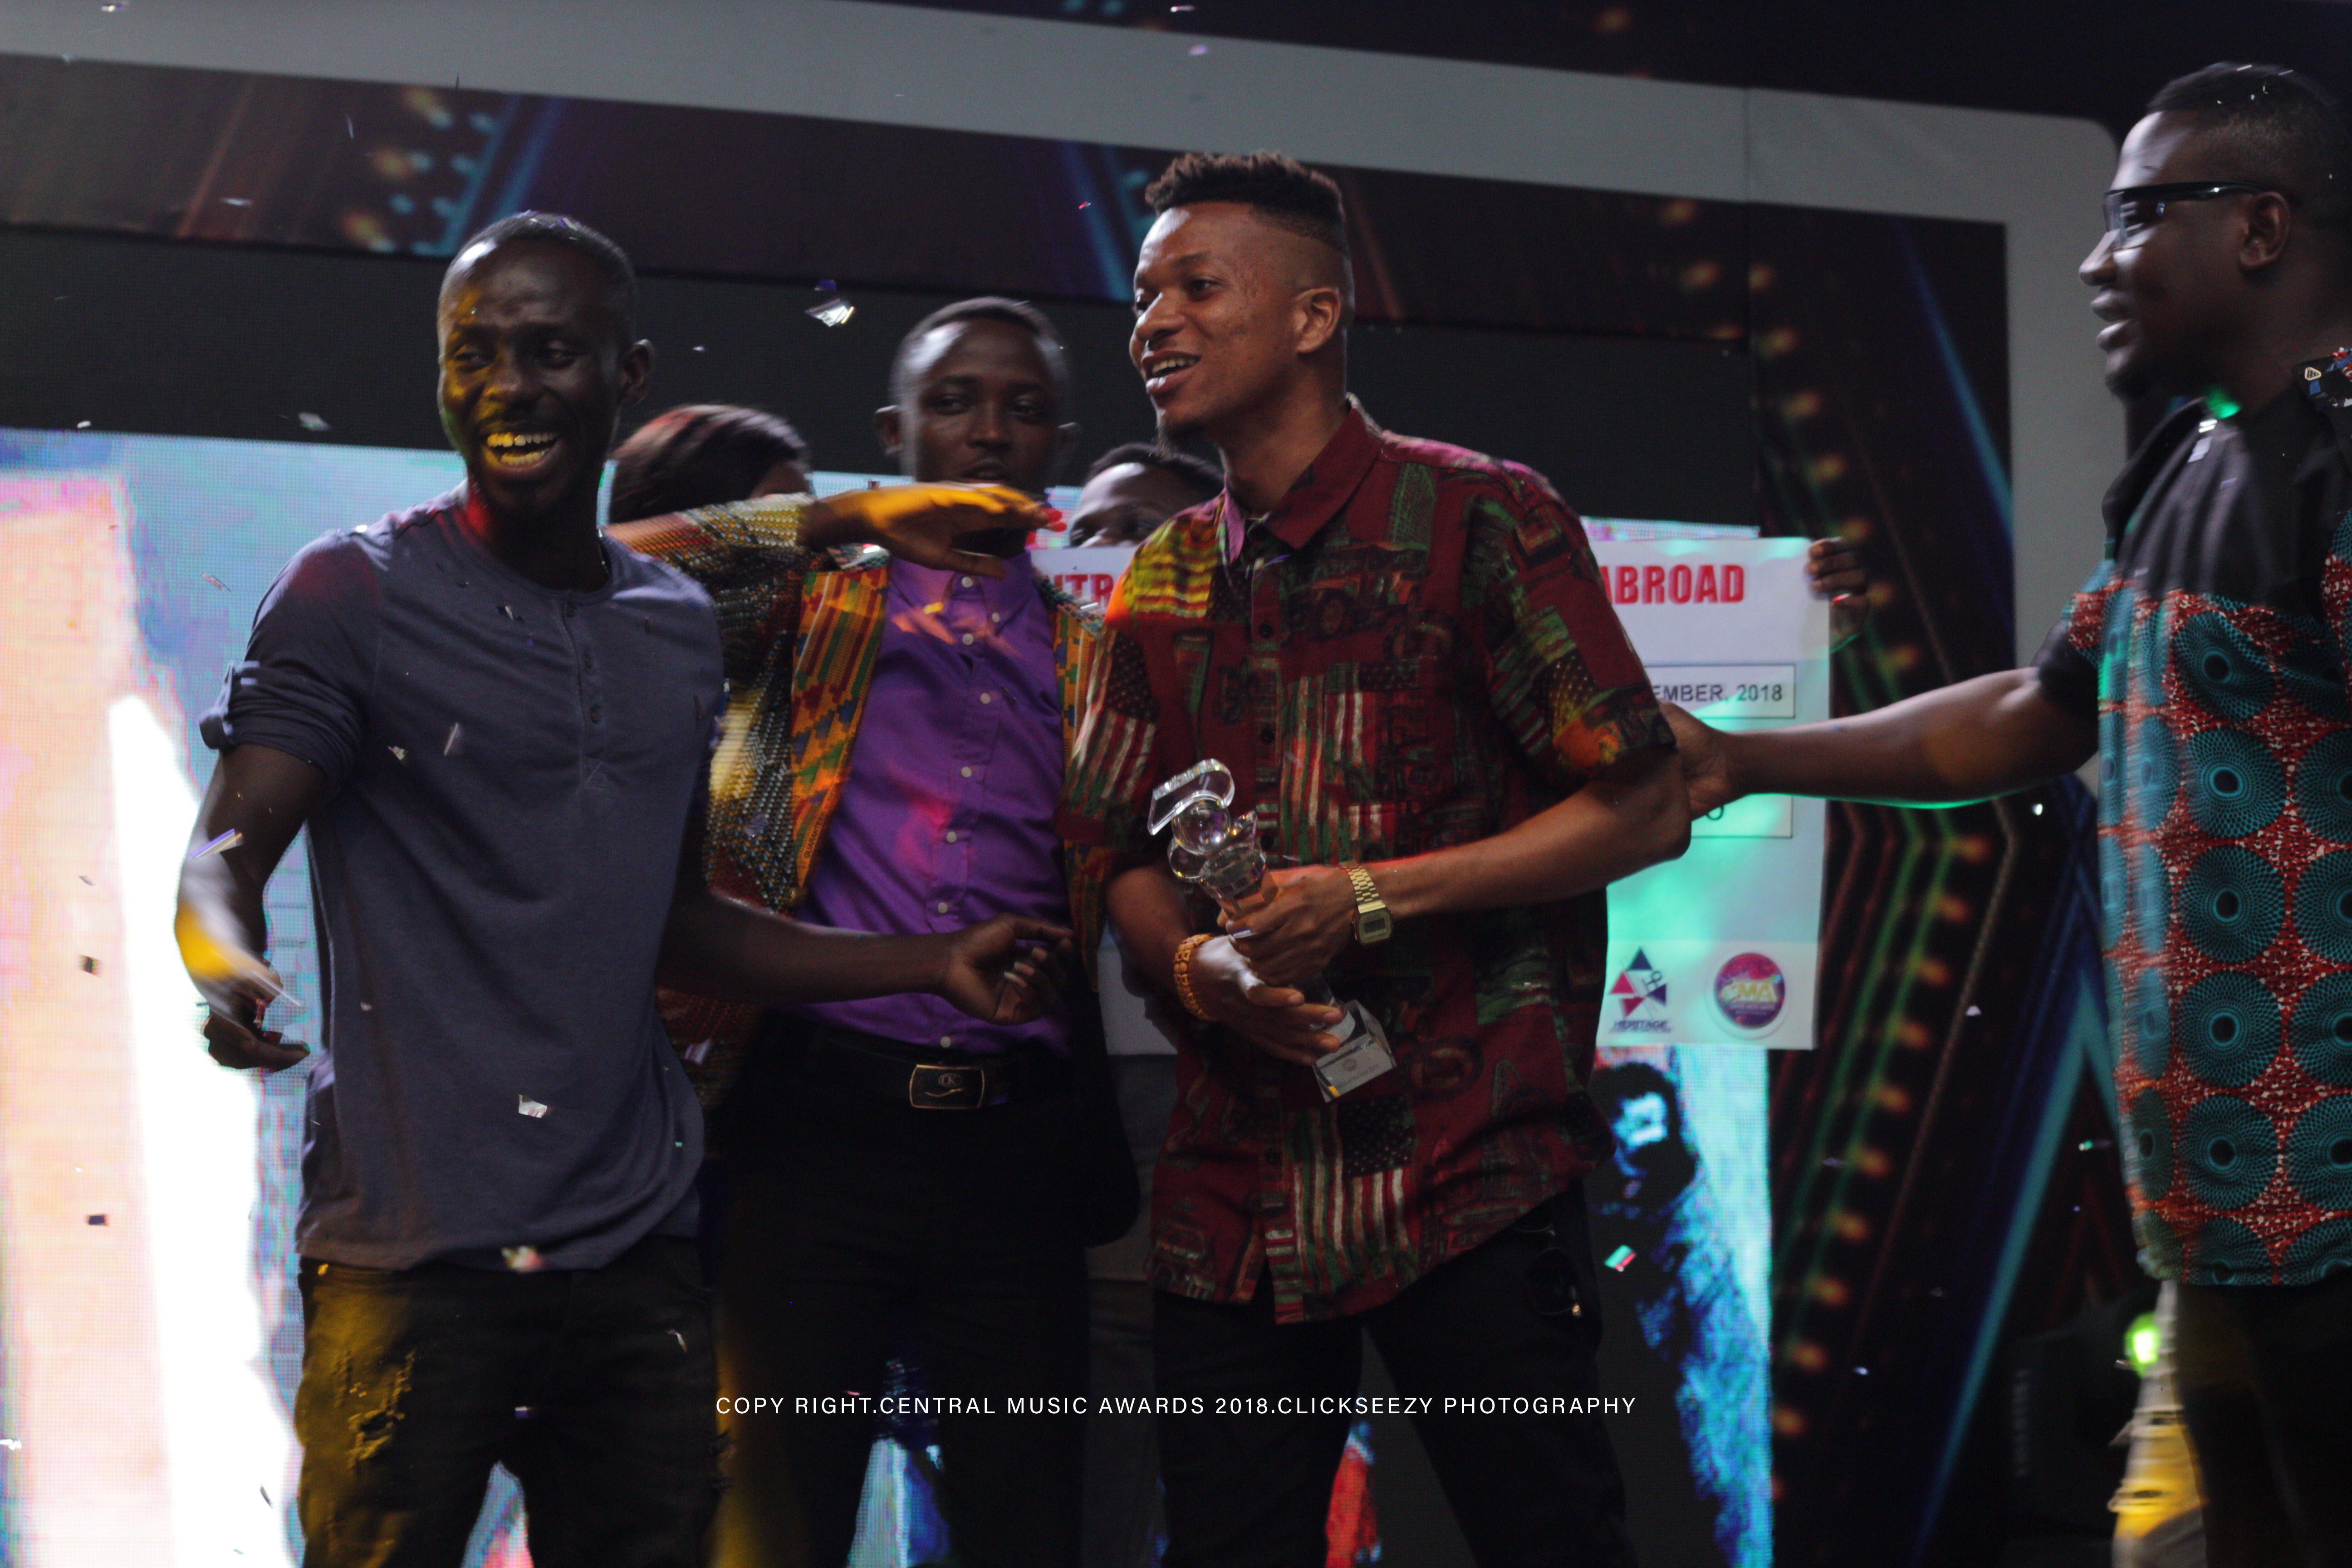 Real mc wins Central music awards 2018 6